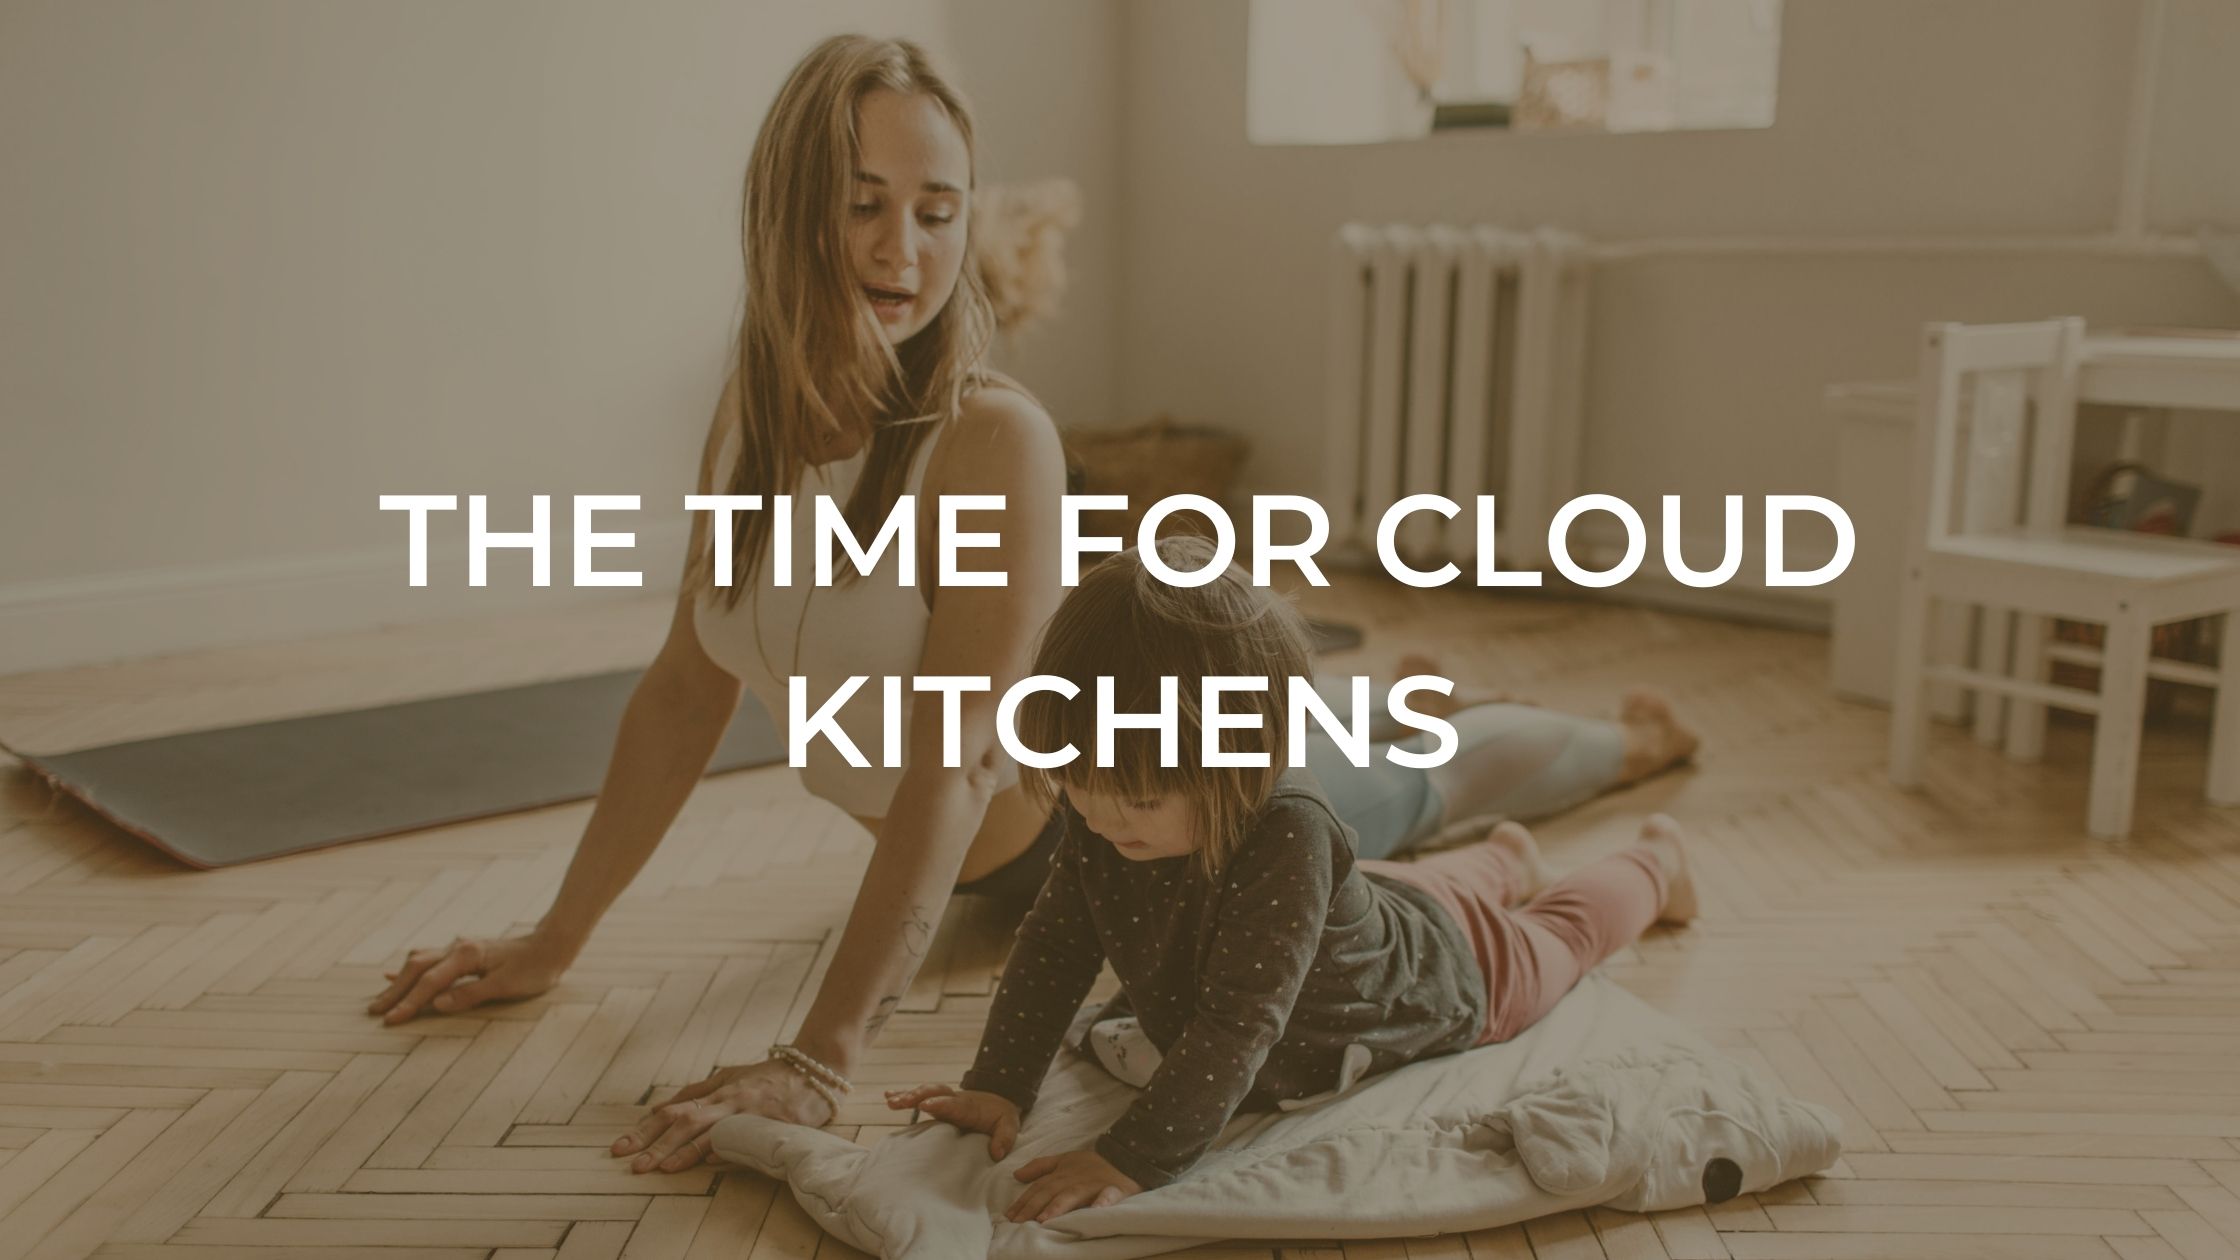 The time for cloud kitchens